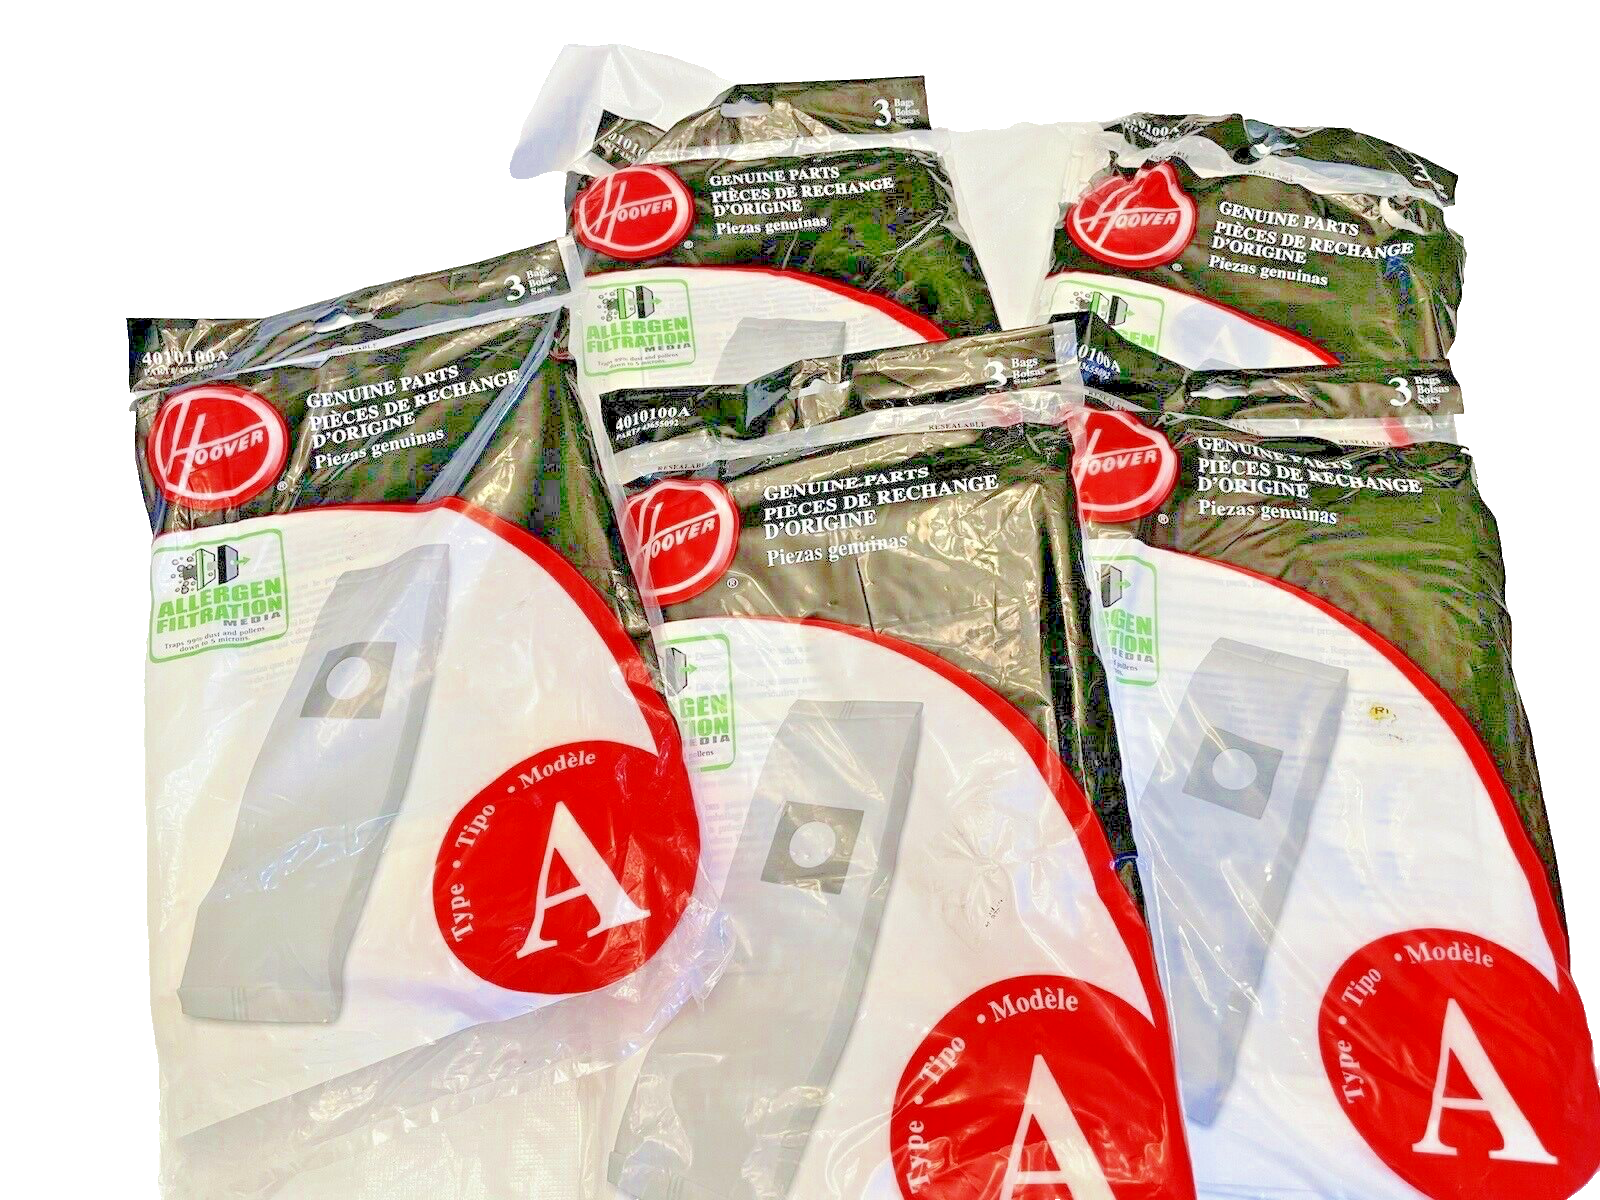 Vacuum Cleaner Bags 14 Hoover Type "A" Genuine Allergen Filtration 4010100A - $30.72